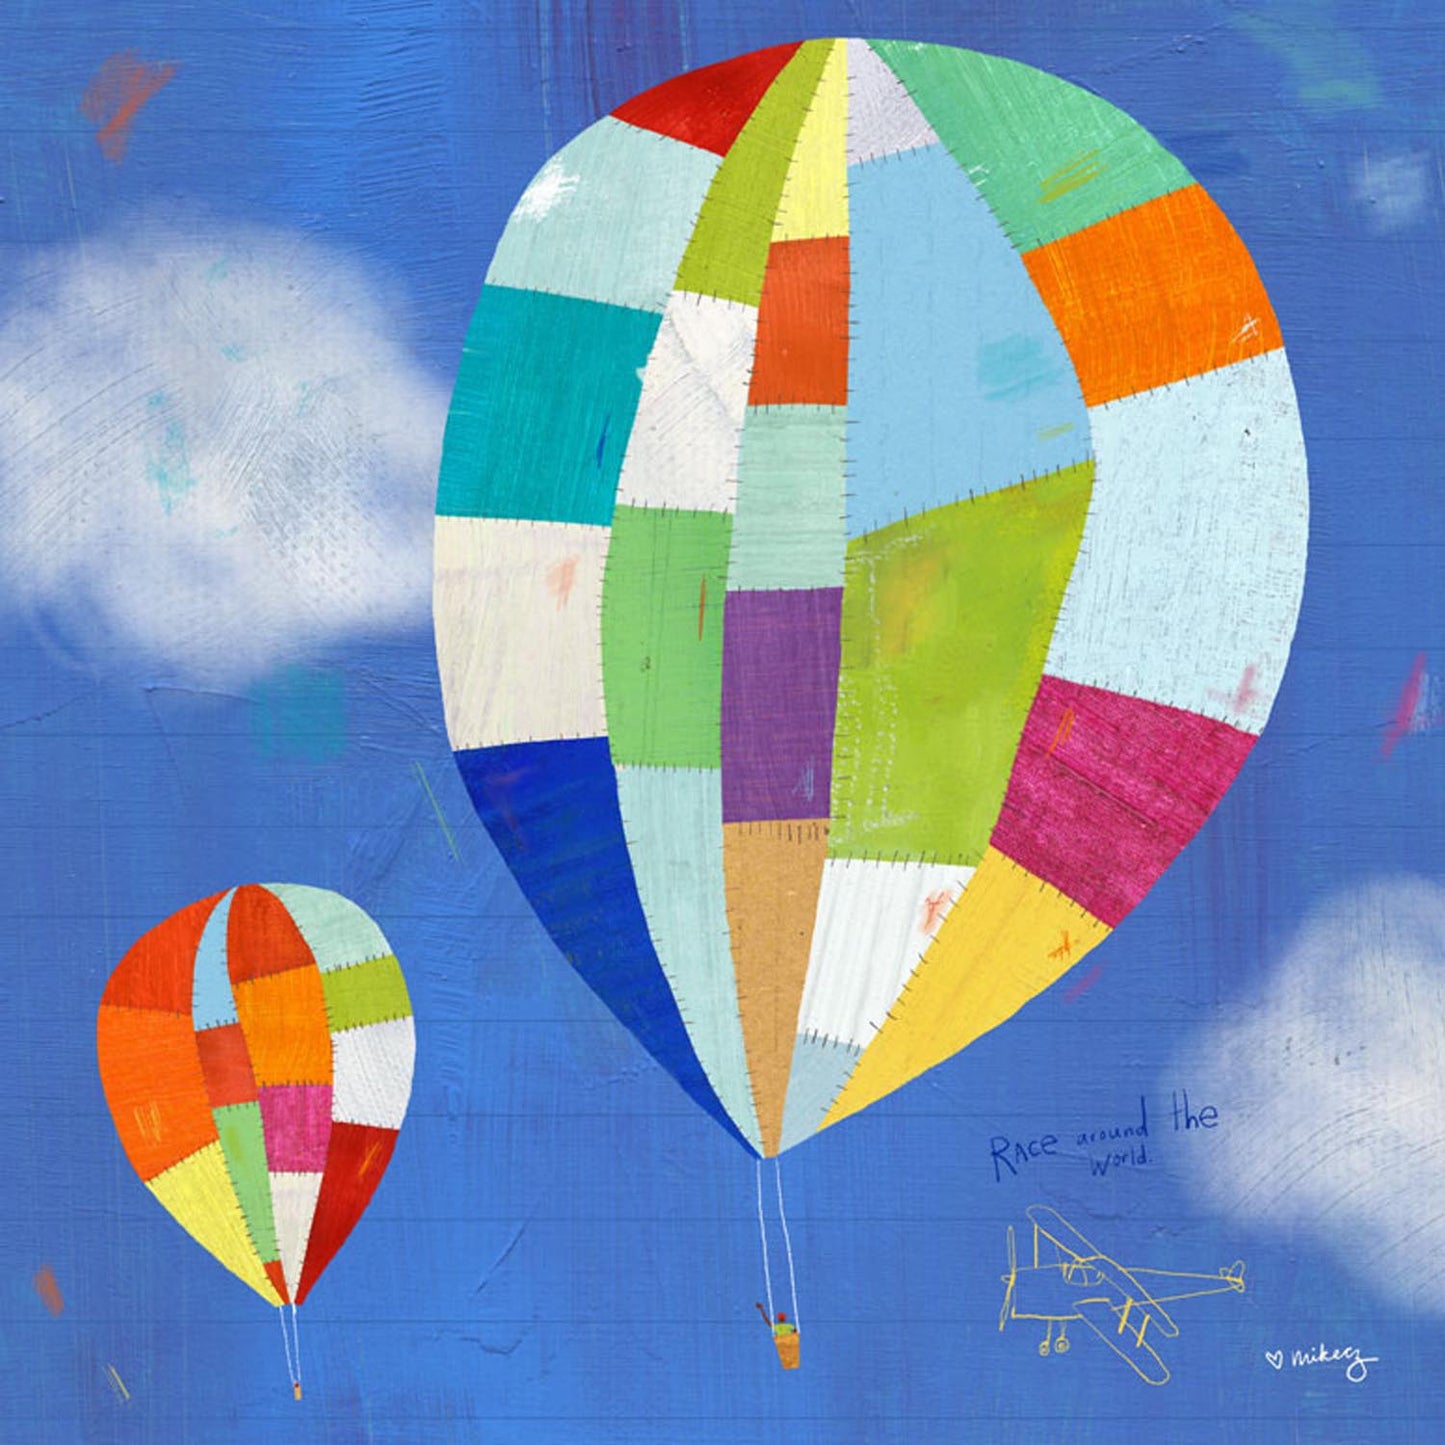 Up and Away Canvas Wall Art